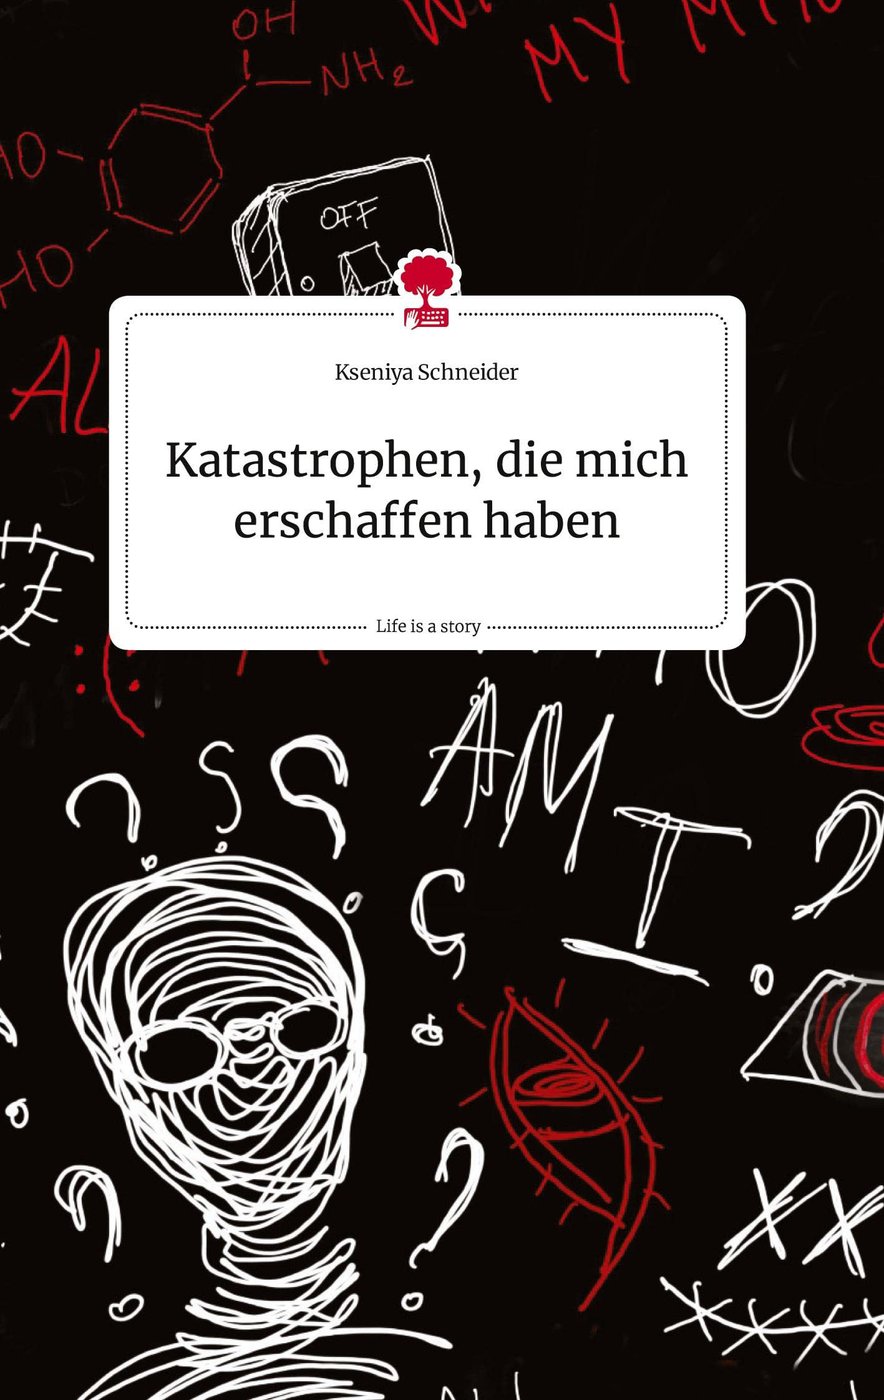 Book cover “Katastrophen, die mich erschaffen haben” [Catastrophes That Made Me]. Visible in the background is a detail of the graphic work “Where is my mind?”, and in the upper half a white frame with the book title.